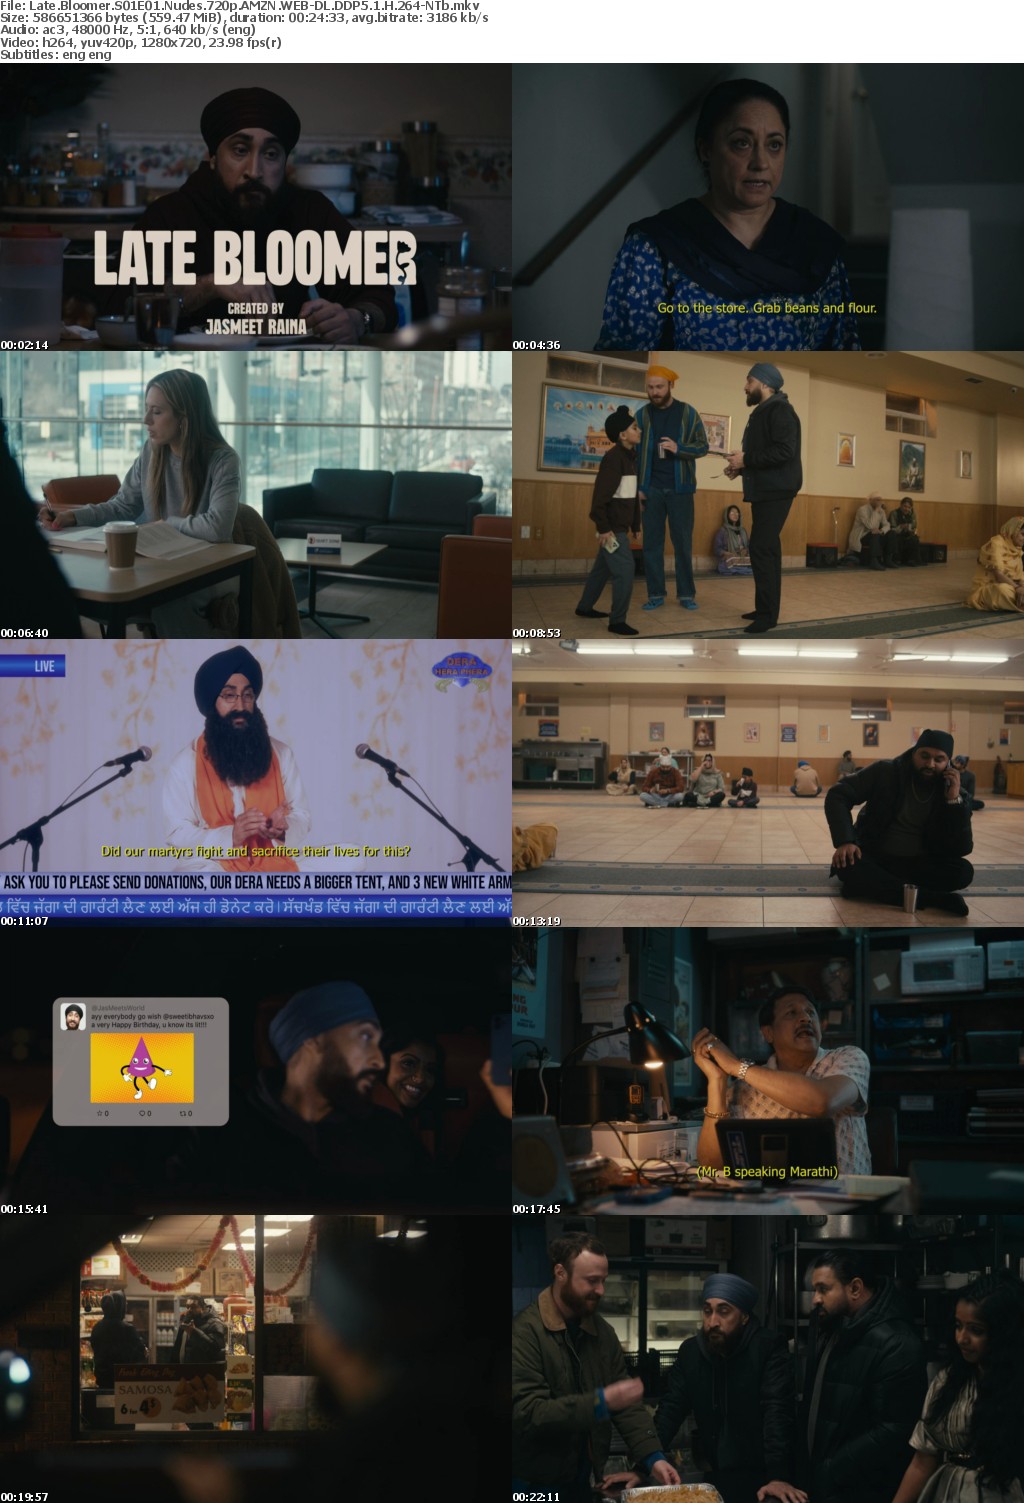 Late Bloomer S01E01 Nudes 720p AMZN WEB-DL DDP5 1 H 264-NTb